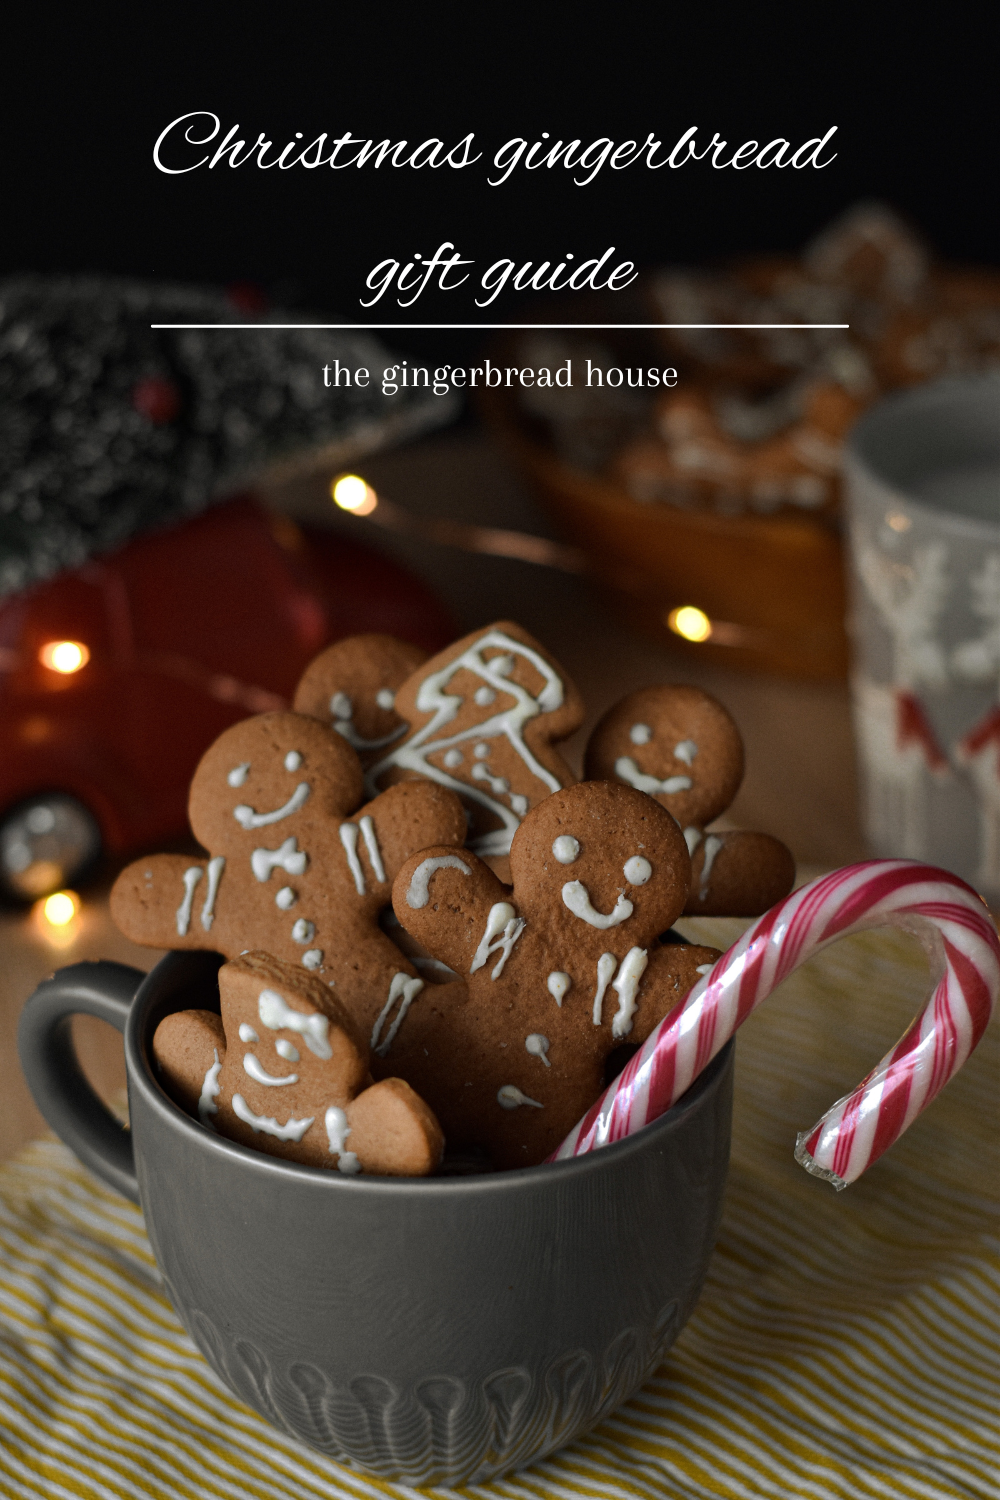 Gift Guide for Christmas Gingerbread Treats